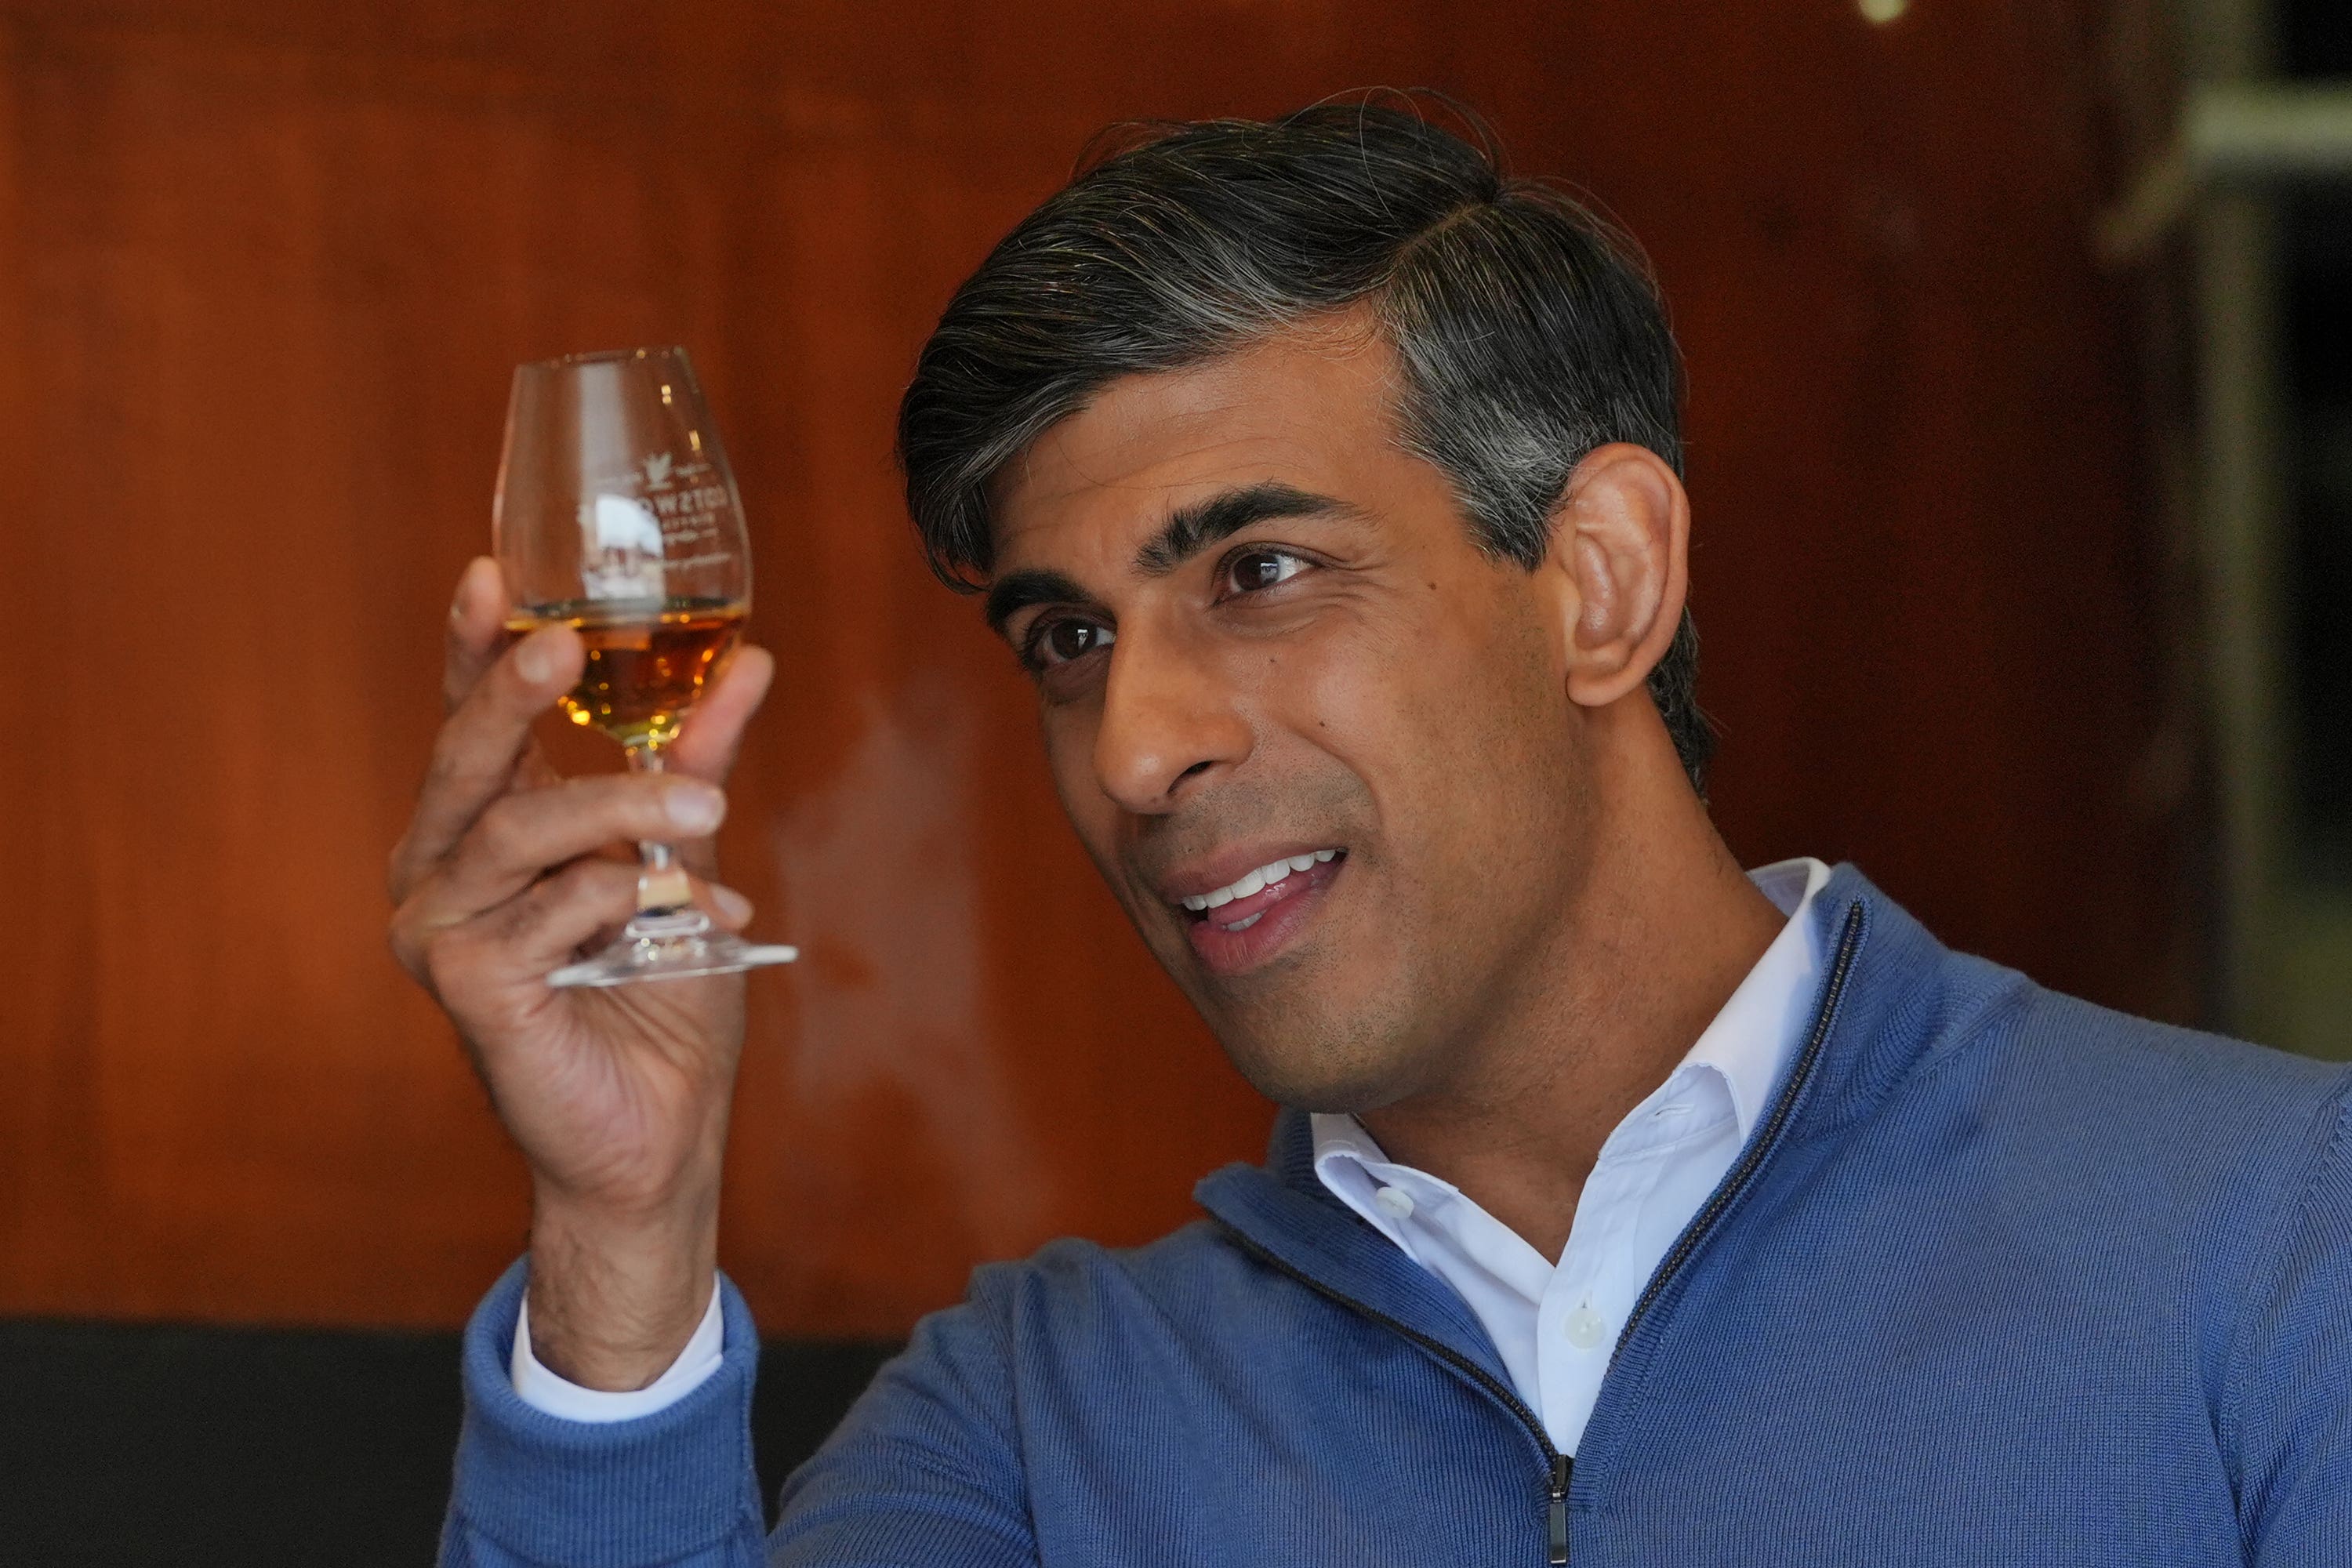 Prime Minister Rishi Sunak looks at a single malt whisky during a visit to the Cotswolds Distillery in Shipston-on-Stour, Warwickshire (Jonathan Brady/PA)